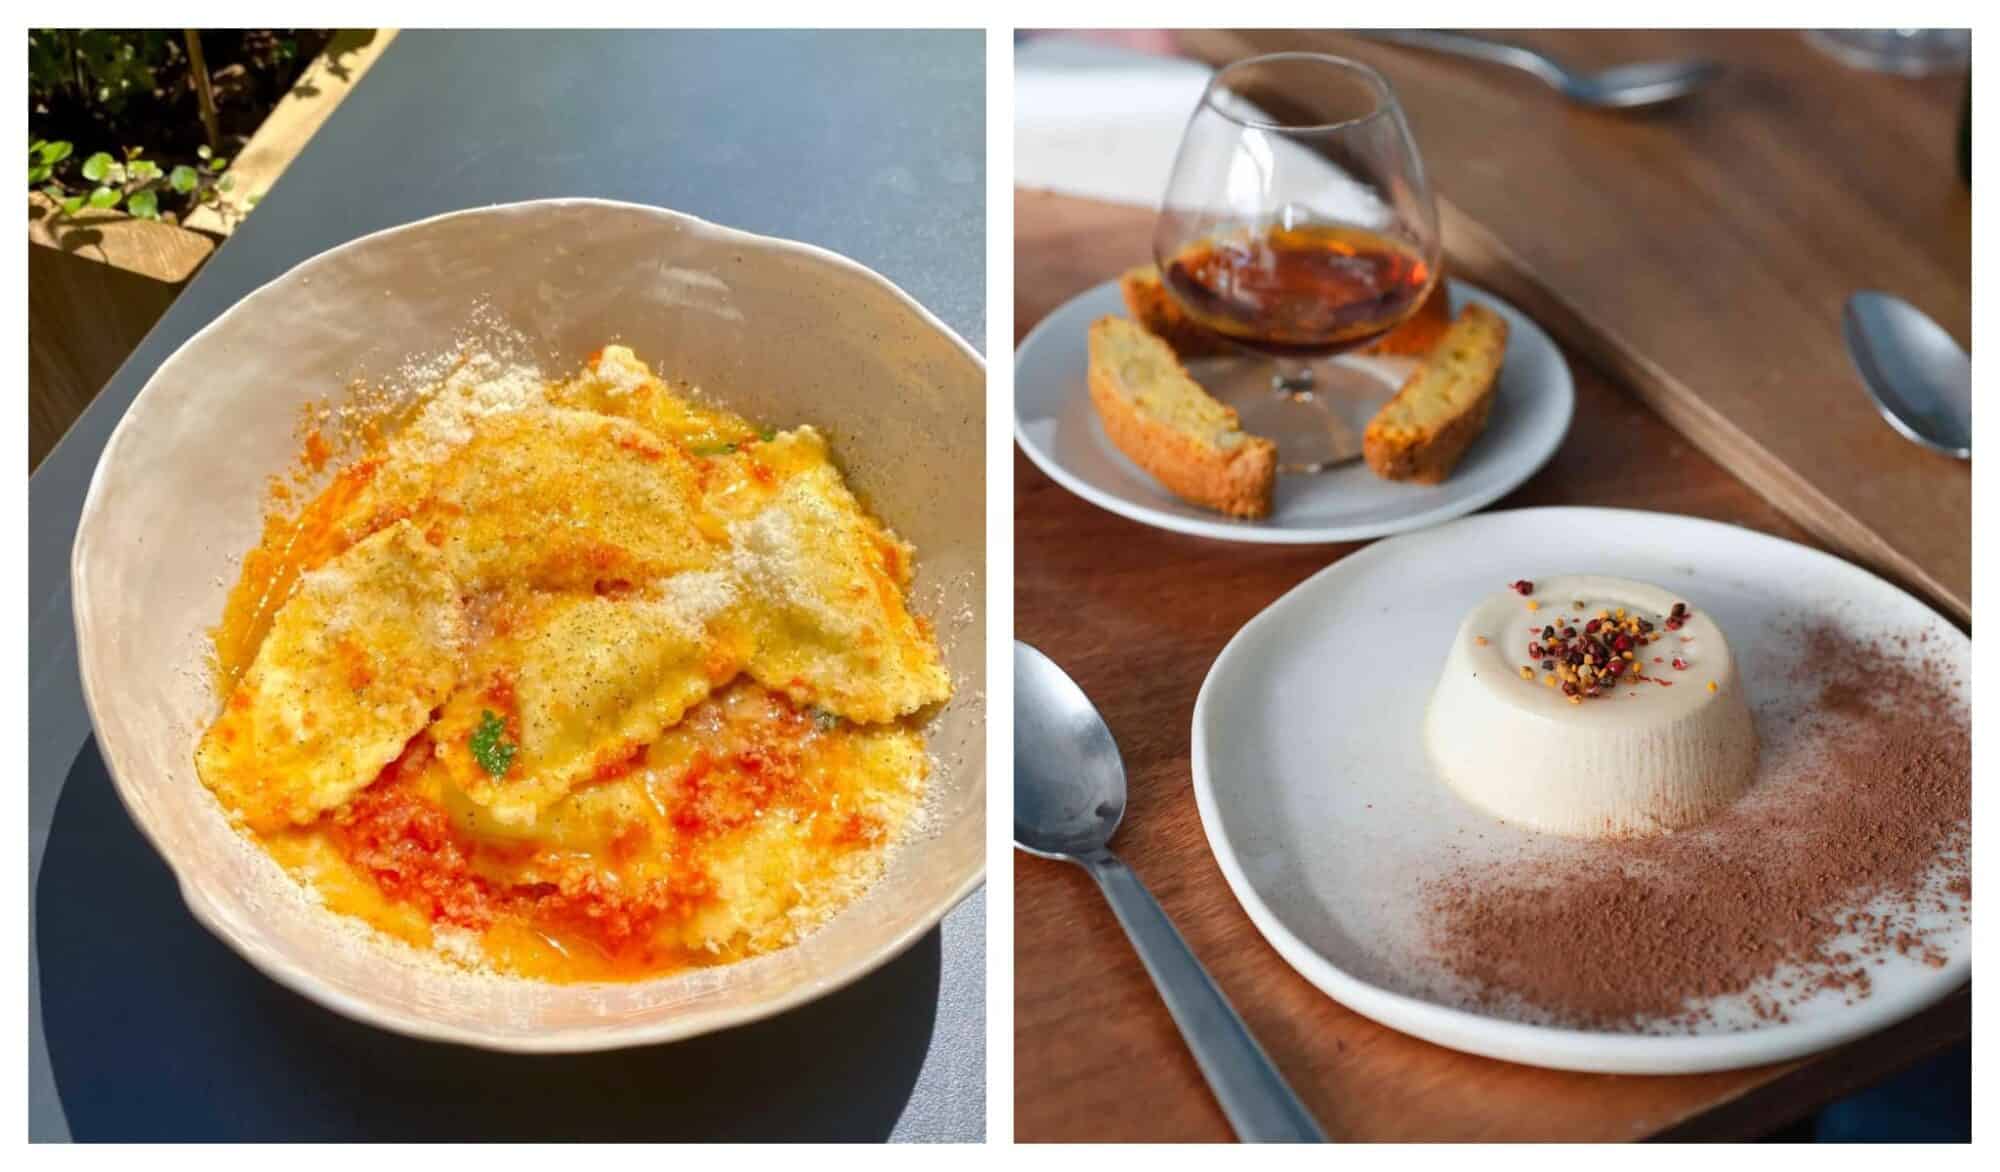 Left: a bowl of ravioli in tomato sauce in the sun at Tempilenti Italian restaurant; right: a plate of panacotta with cocoa powder sprinkled on top and another plate of biscotti and liqueur in the background.